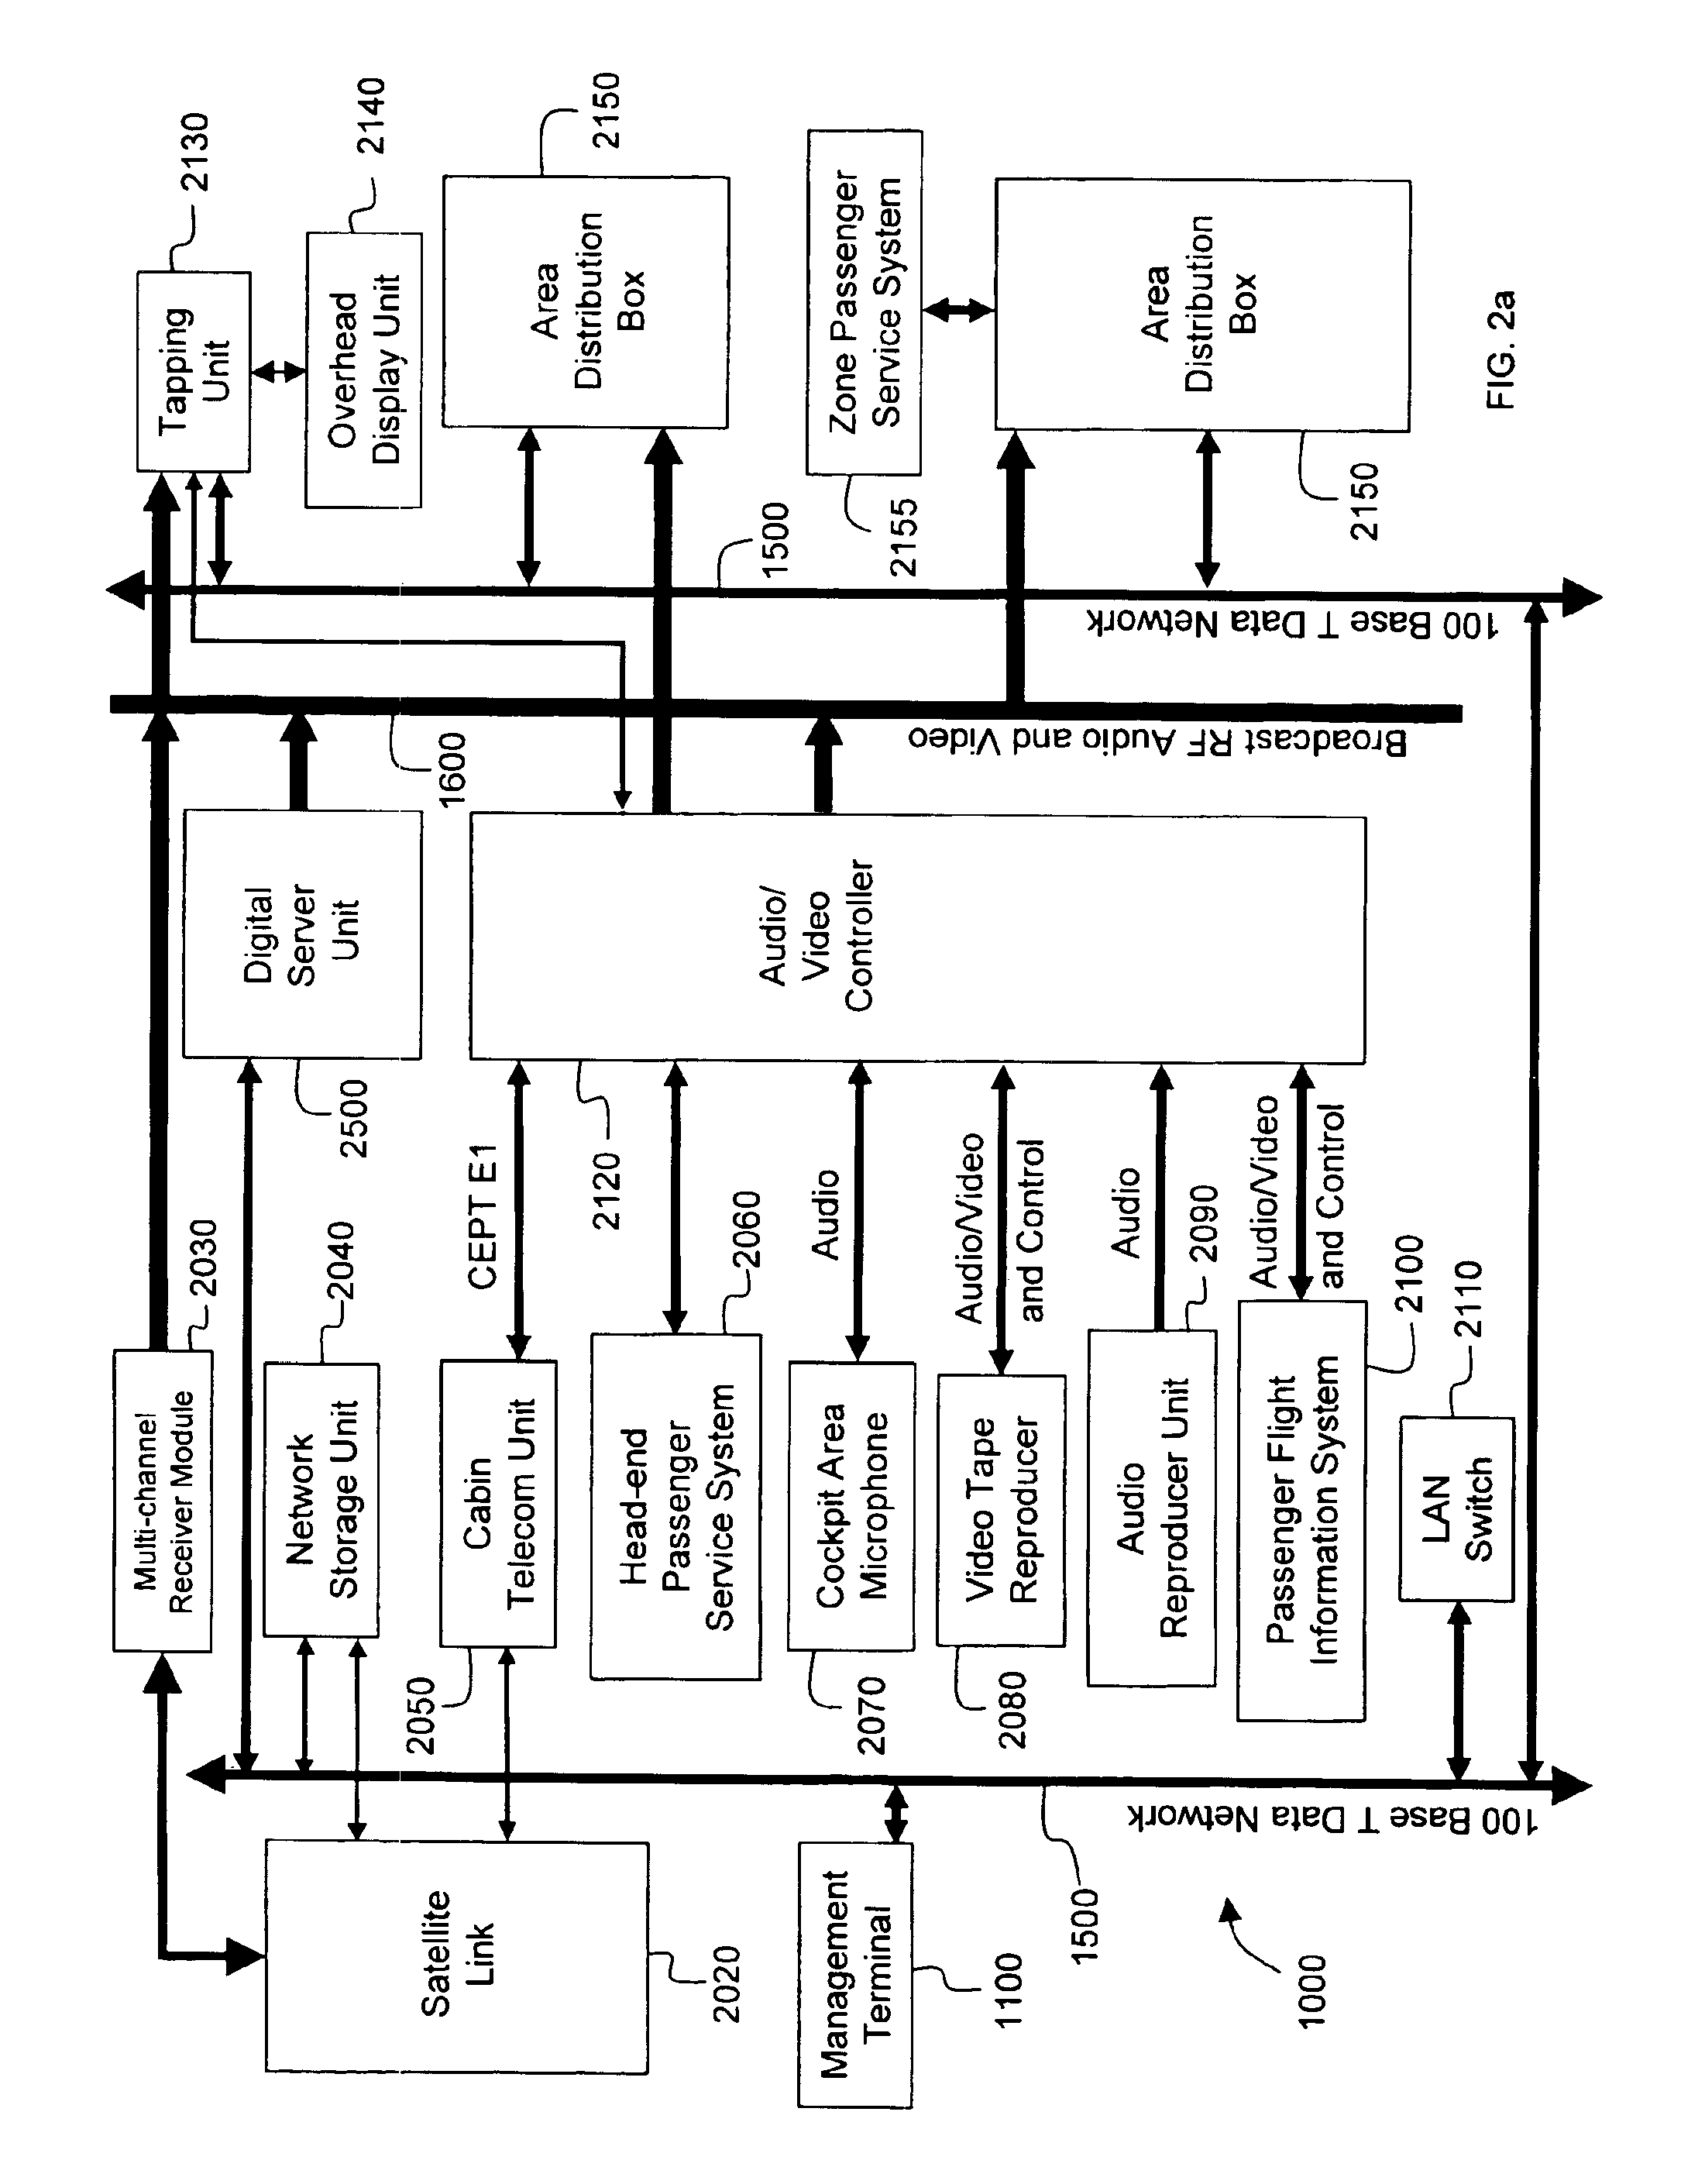 Method and system for configuration and download in a restricted architecture network